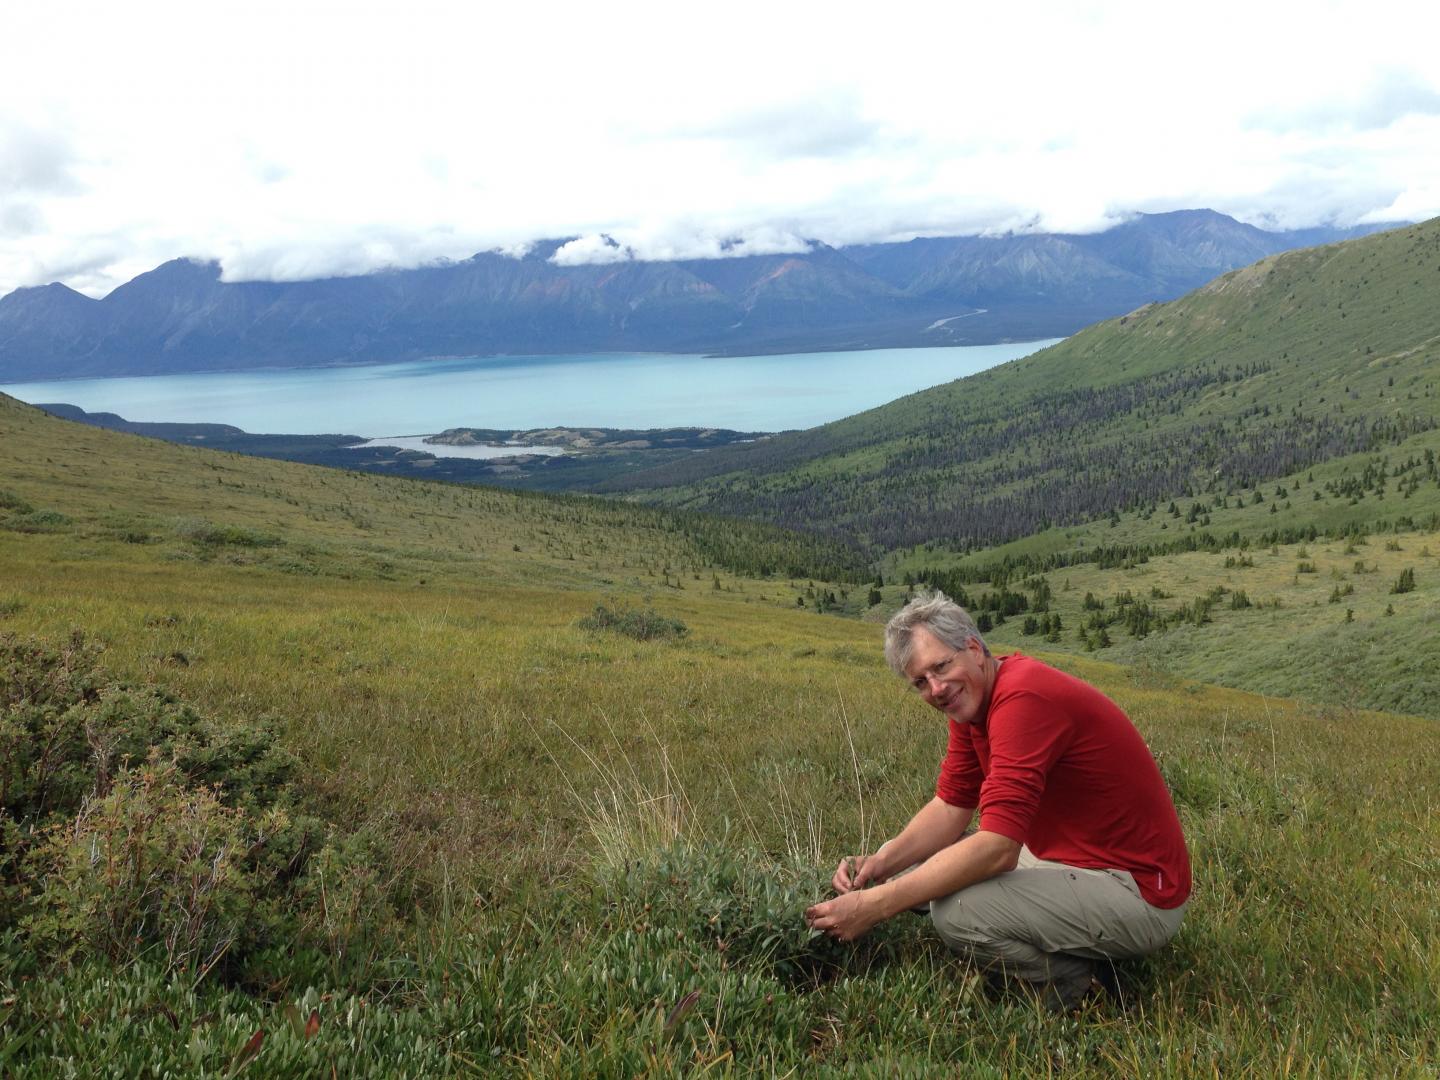 Global Study Finds Taller Plant Species Taking Over as Mountains and the Arctic Warm